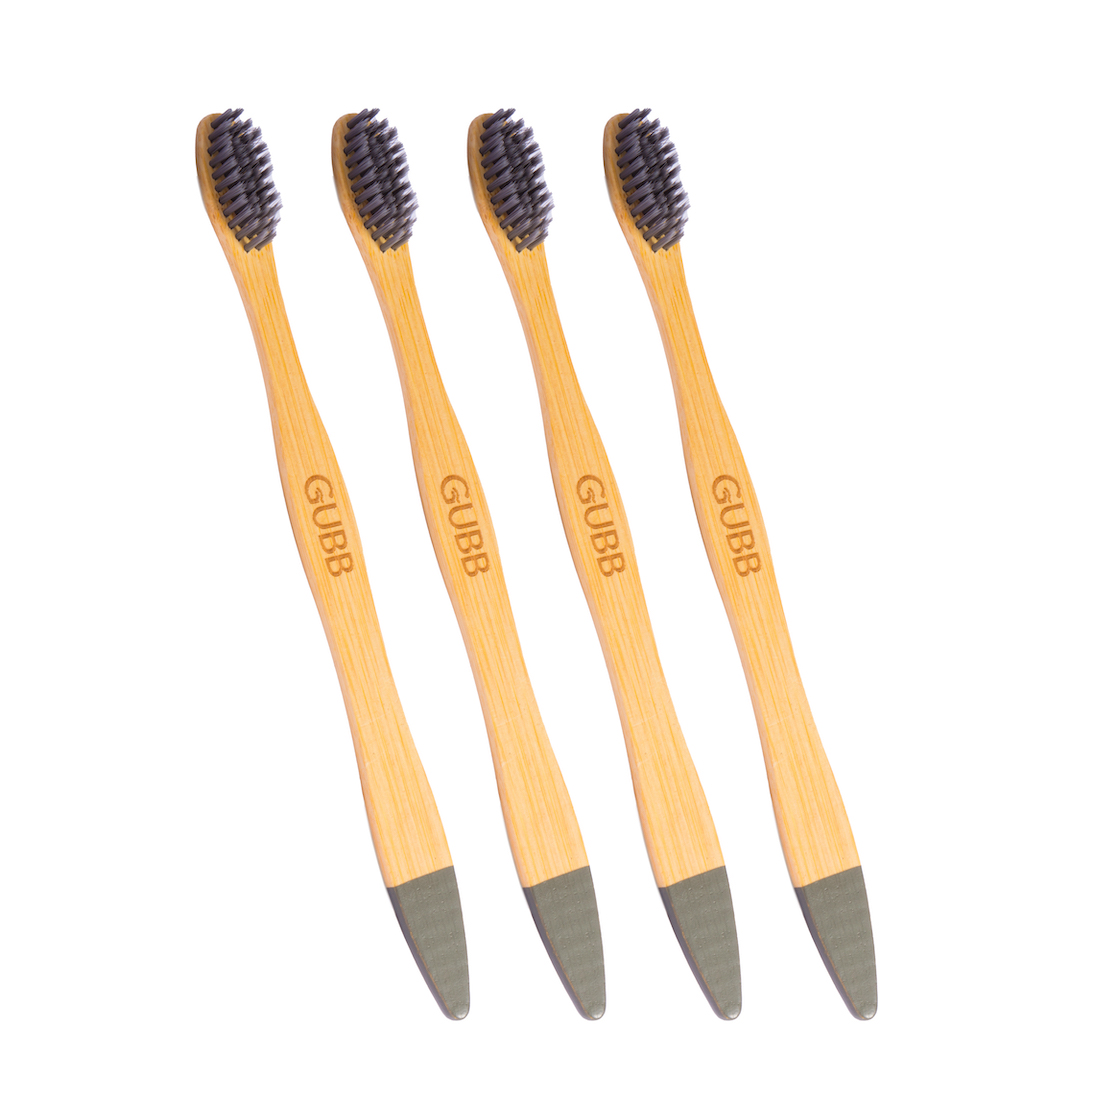 Organic bamboo toothbrush charcoal pack of 4